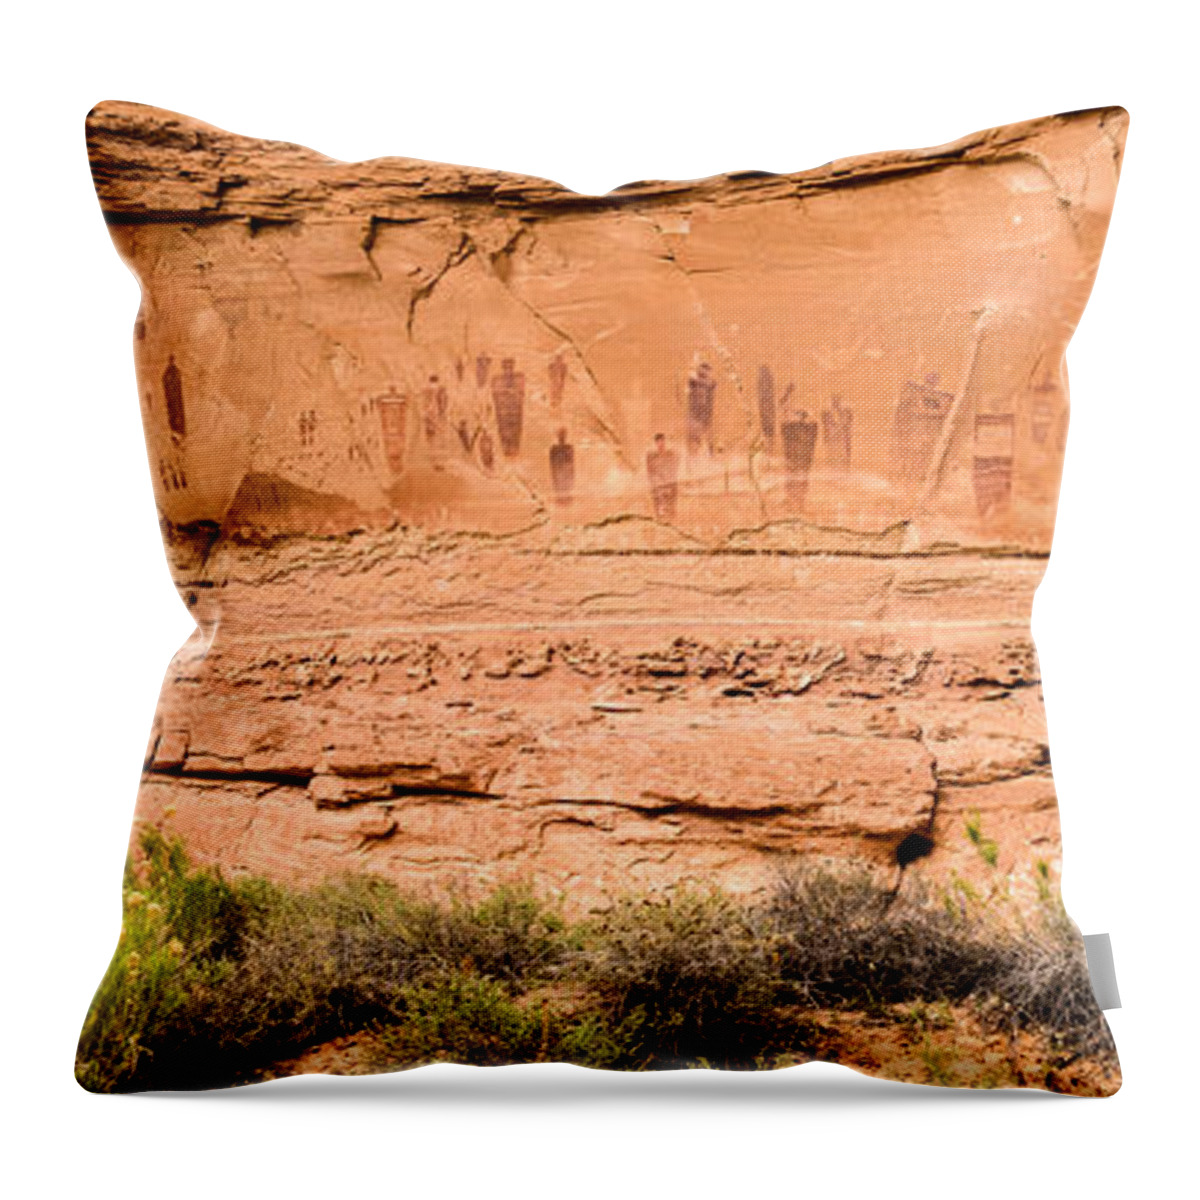 Horseshoe Canyon Throw Pillow featuring the photograph Horseshoe Canyon Great Gallery Panorama Pictographs by Gary Whitton